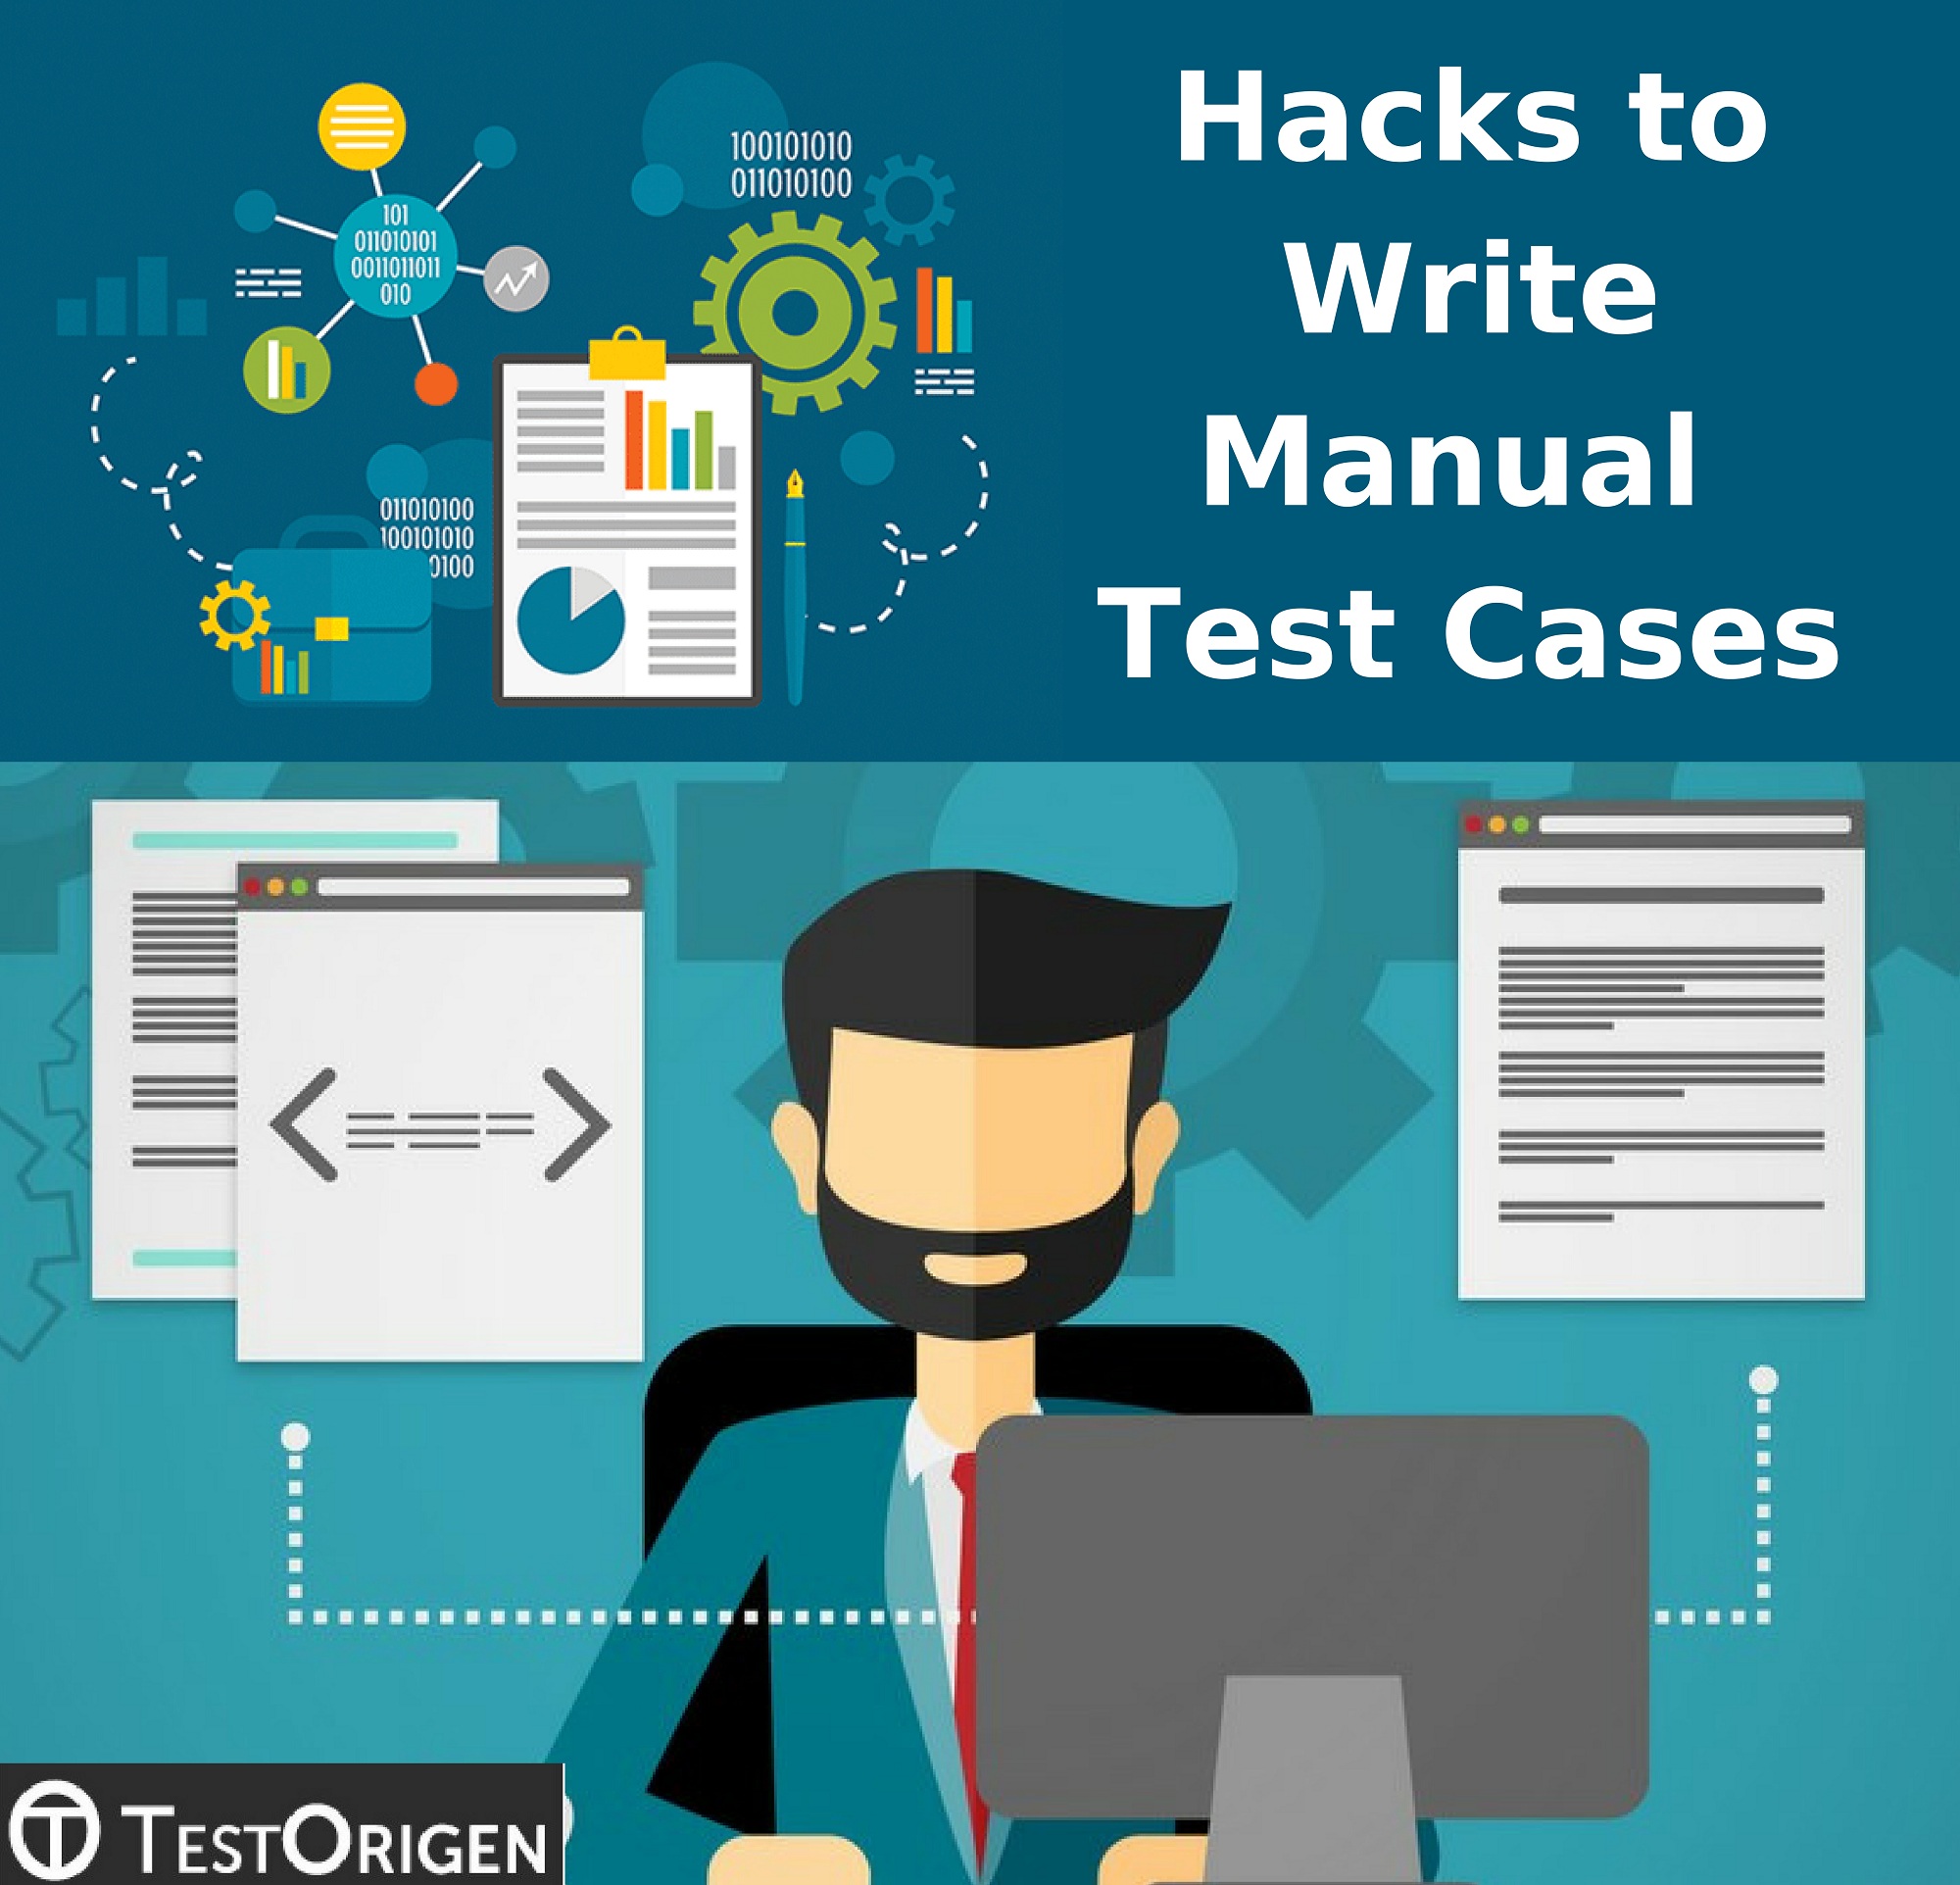 Hacks to Write Manual Test Cases